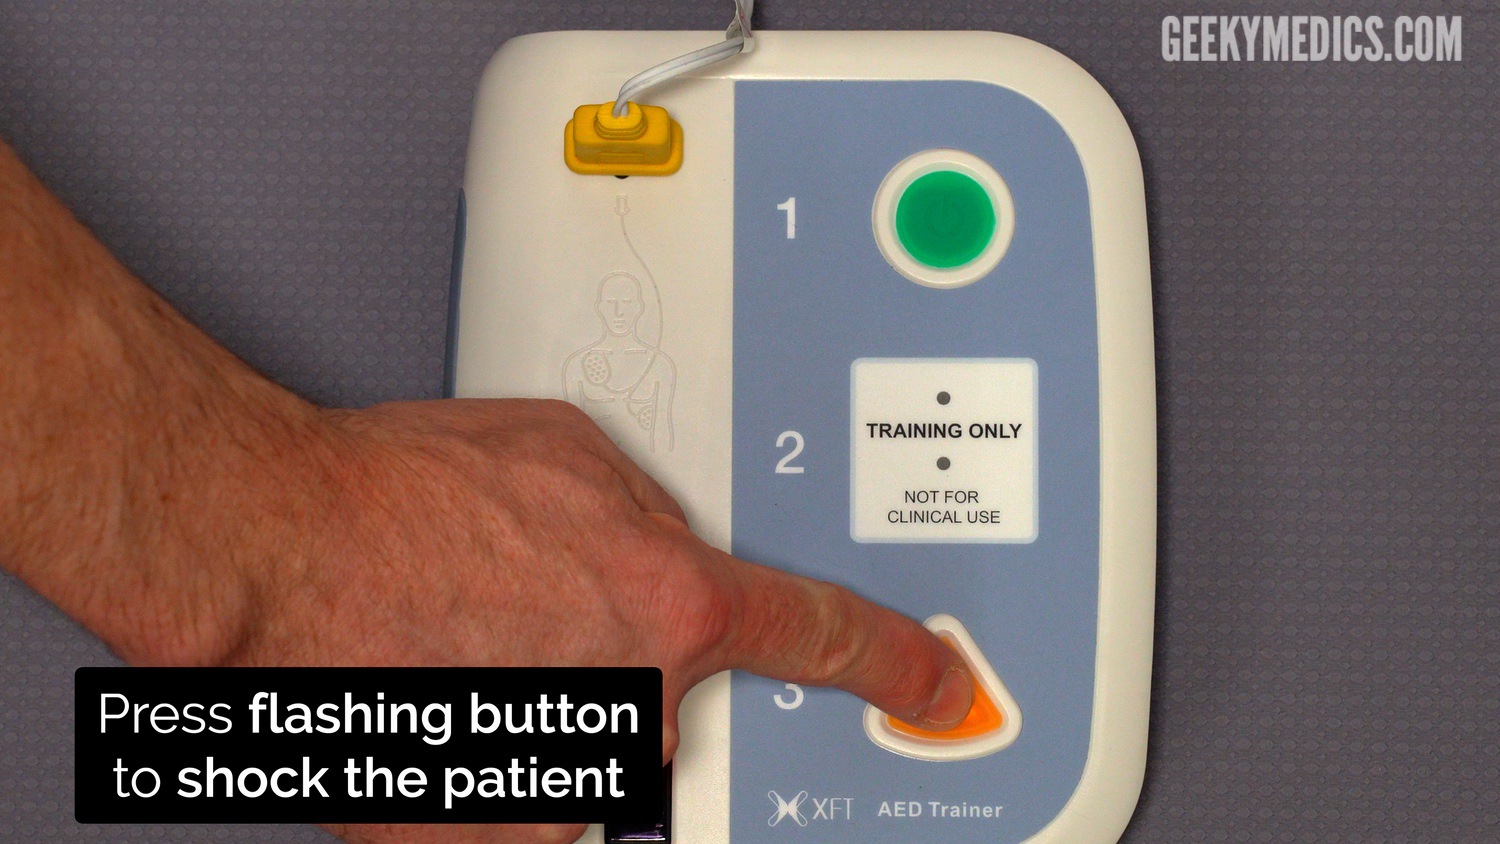 If a shock is required, after the AED has charged press the flashing button to deliver a shock